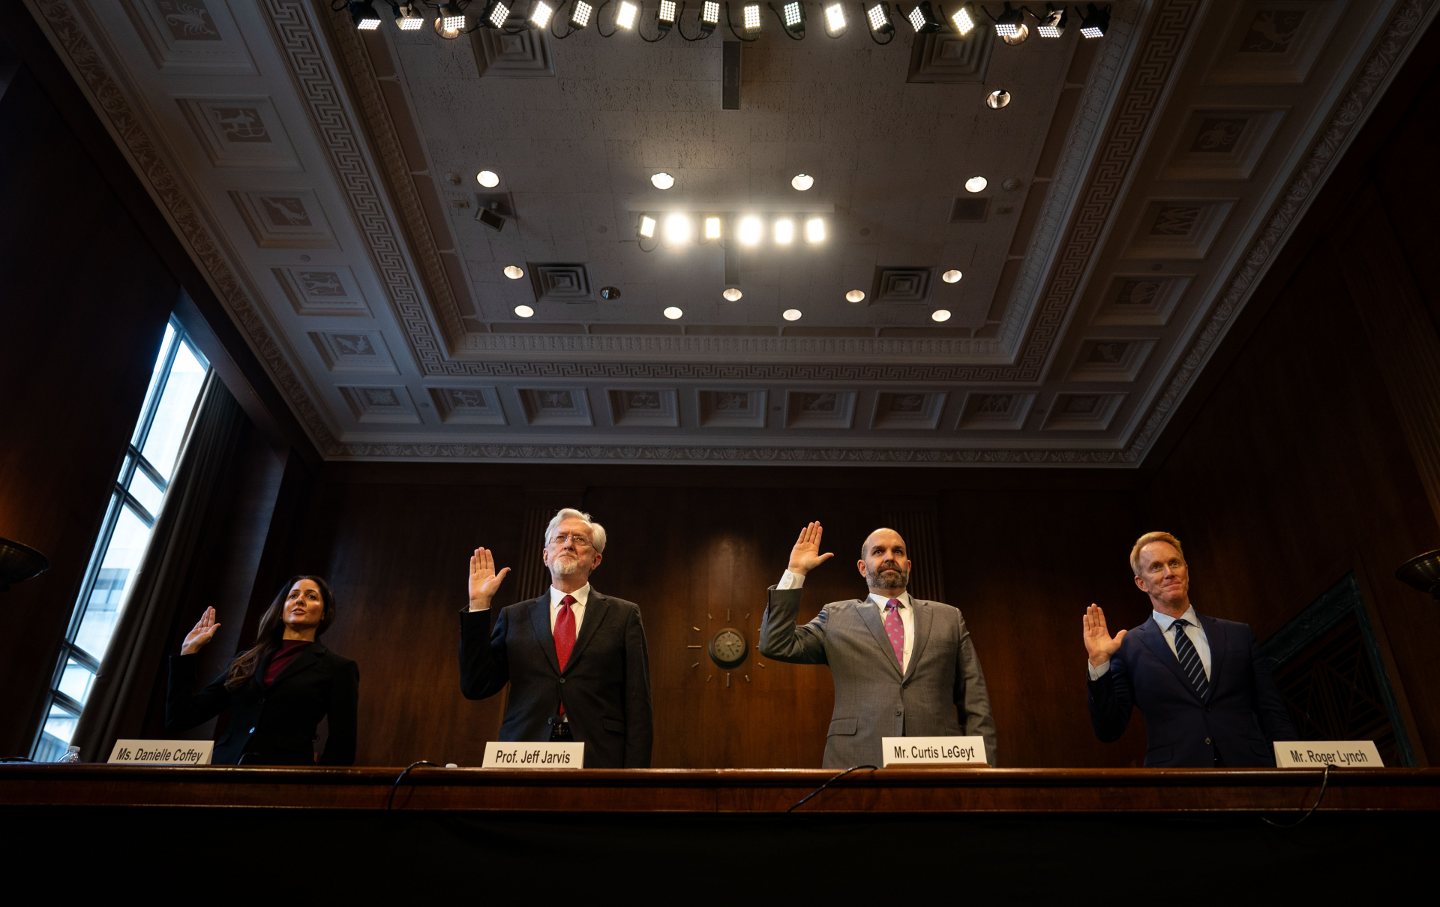 President and CEO of News Media Alliance Danielle Coffey, CUNY Graduate School of Journalism professor Jeff Jarvis, President and CEO of National Association of Broadcasters Curtis LeGeyt, and Condé Nast CEO Roger Lynch are sworn in during a Senate Judiciary Subcommittee on Privacy, Technology, and the Law hearing on “Artificial Intelligence and the Future of Journalism” at the US Capitol on January 10, 2024, in Washington, D.C. Lawmakers continue to hear testimony from experts and business leaders about artificial intelligence and its impact on democracy, elections, privacy, liability and news.